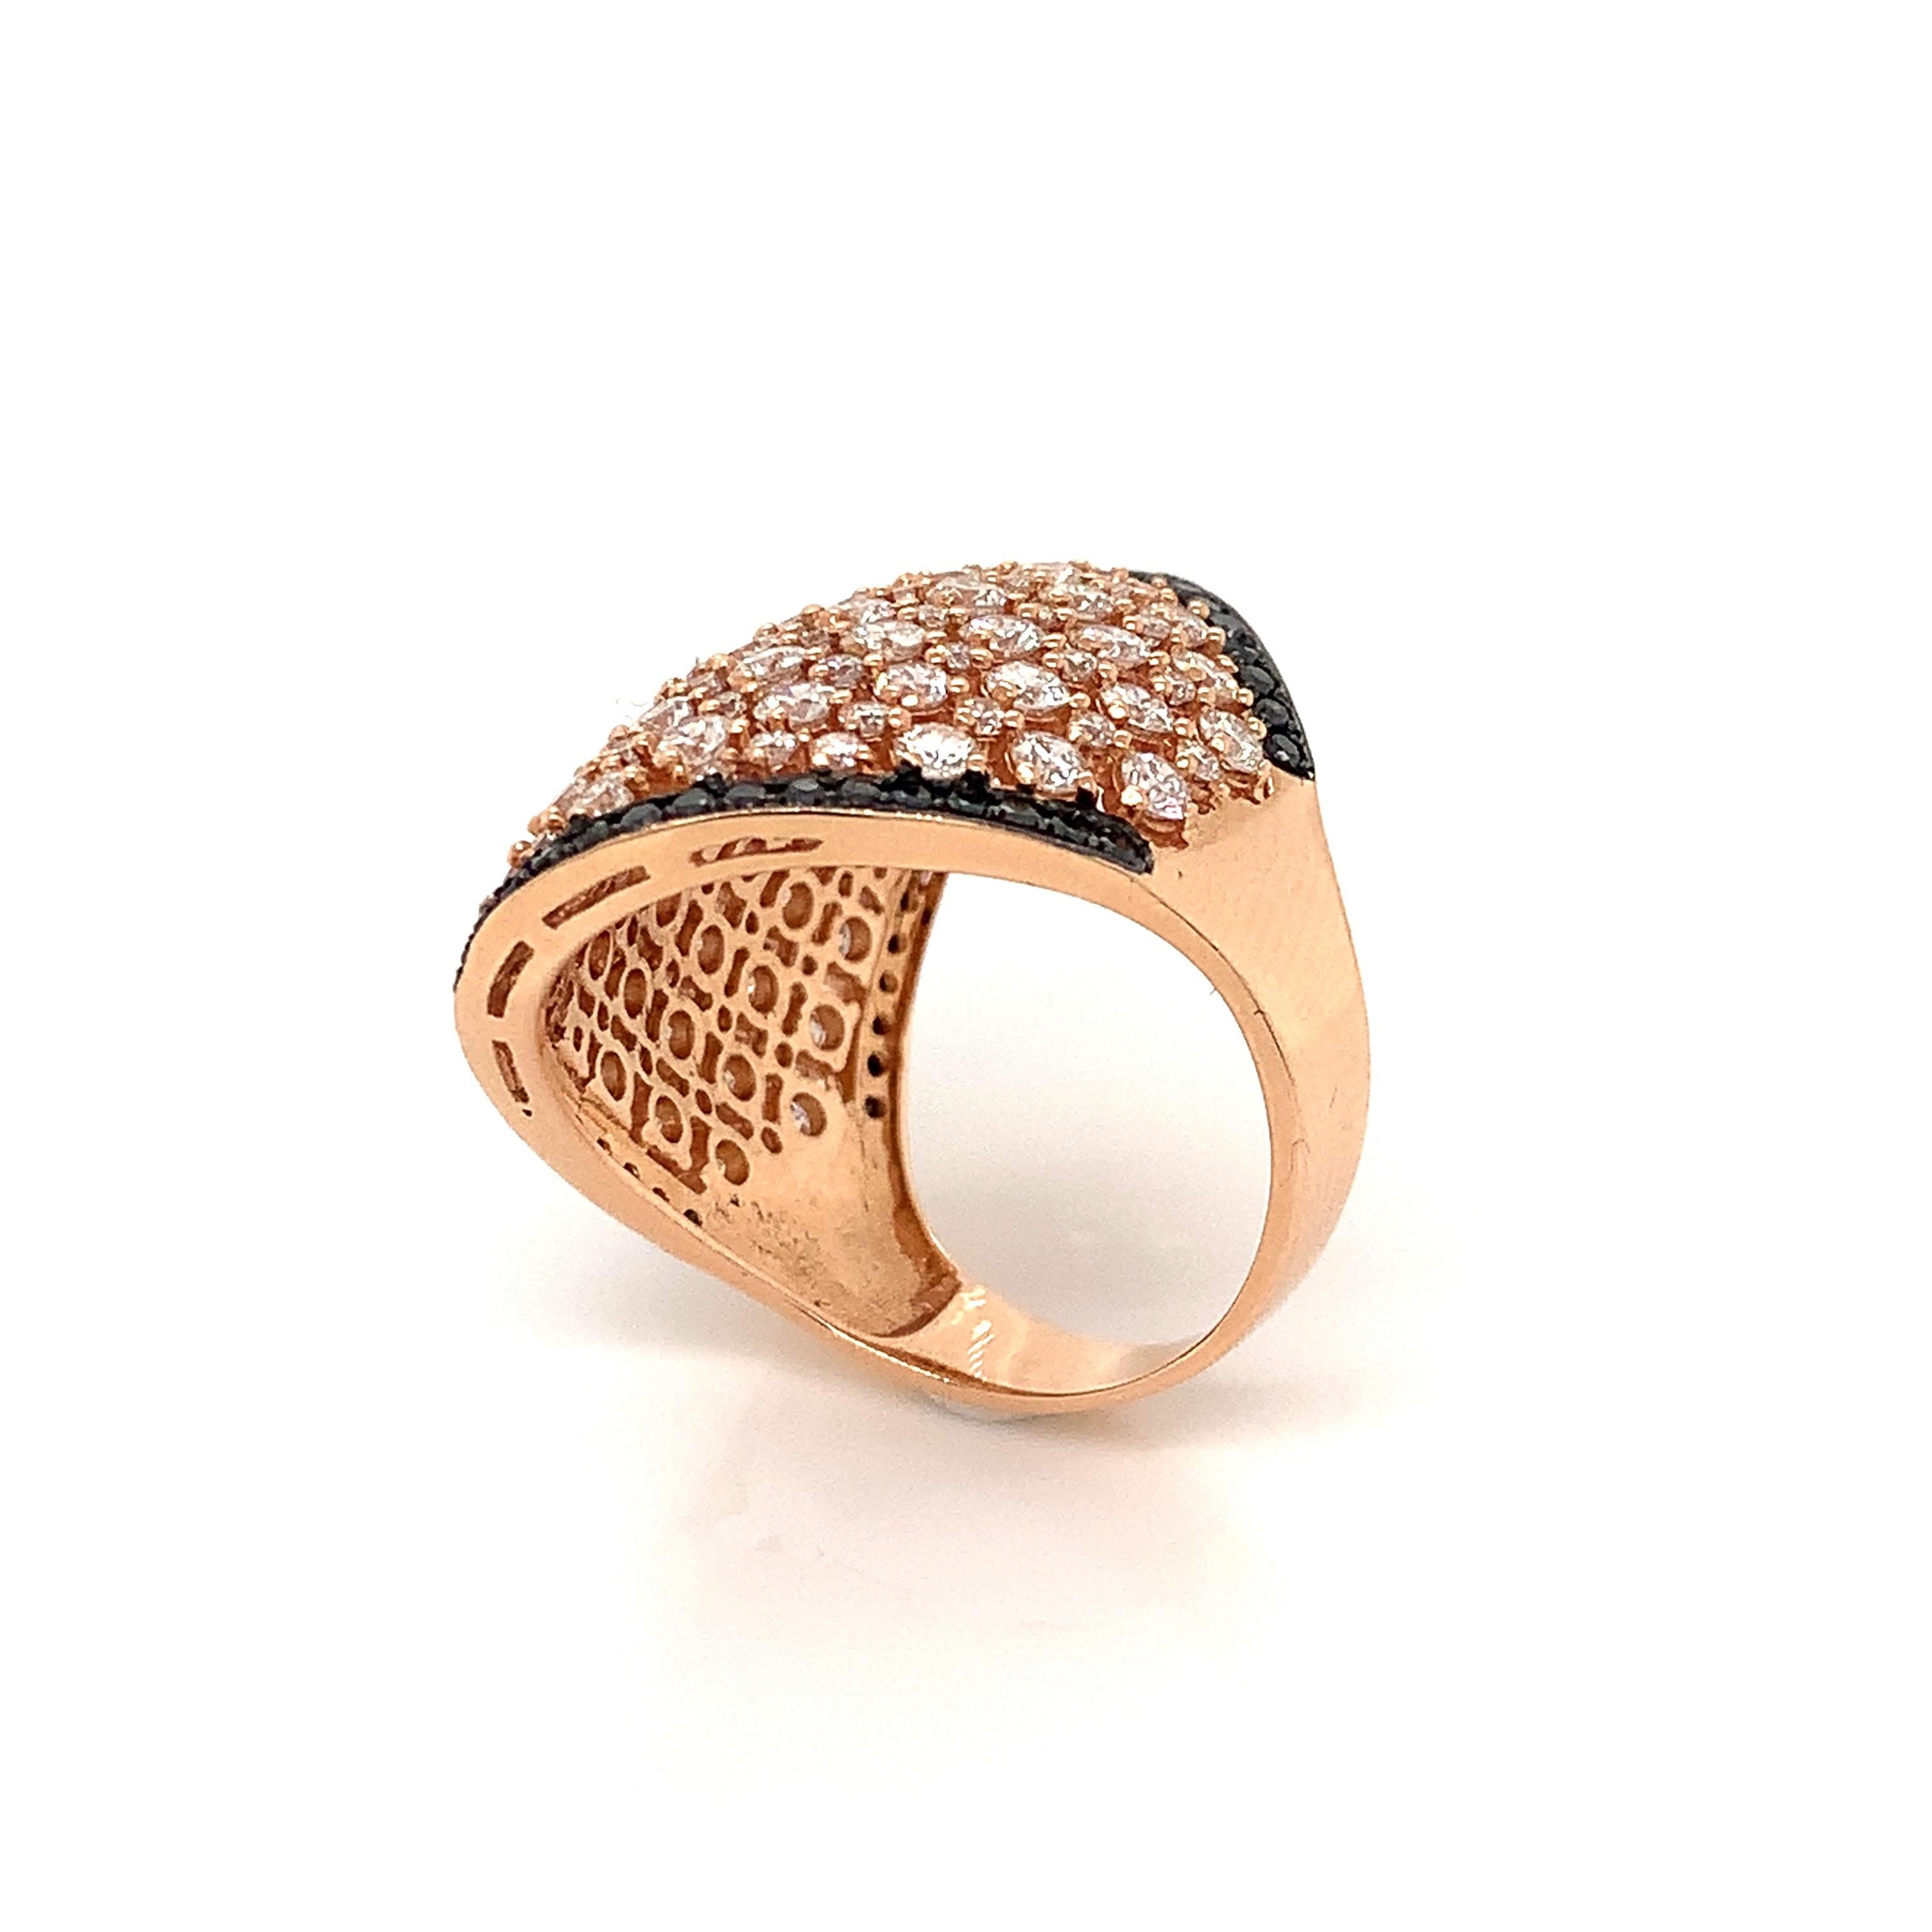 OWN Your Story 18K Rose Gold White and Black Diamond Outlined Rounded Shield Ring

OWN Your Story brings its 3 generations of family tradition and unparalleled experience with 18K gold, diamonds and gemstones to create high-level jewelry handcrafted